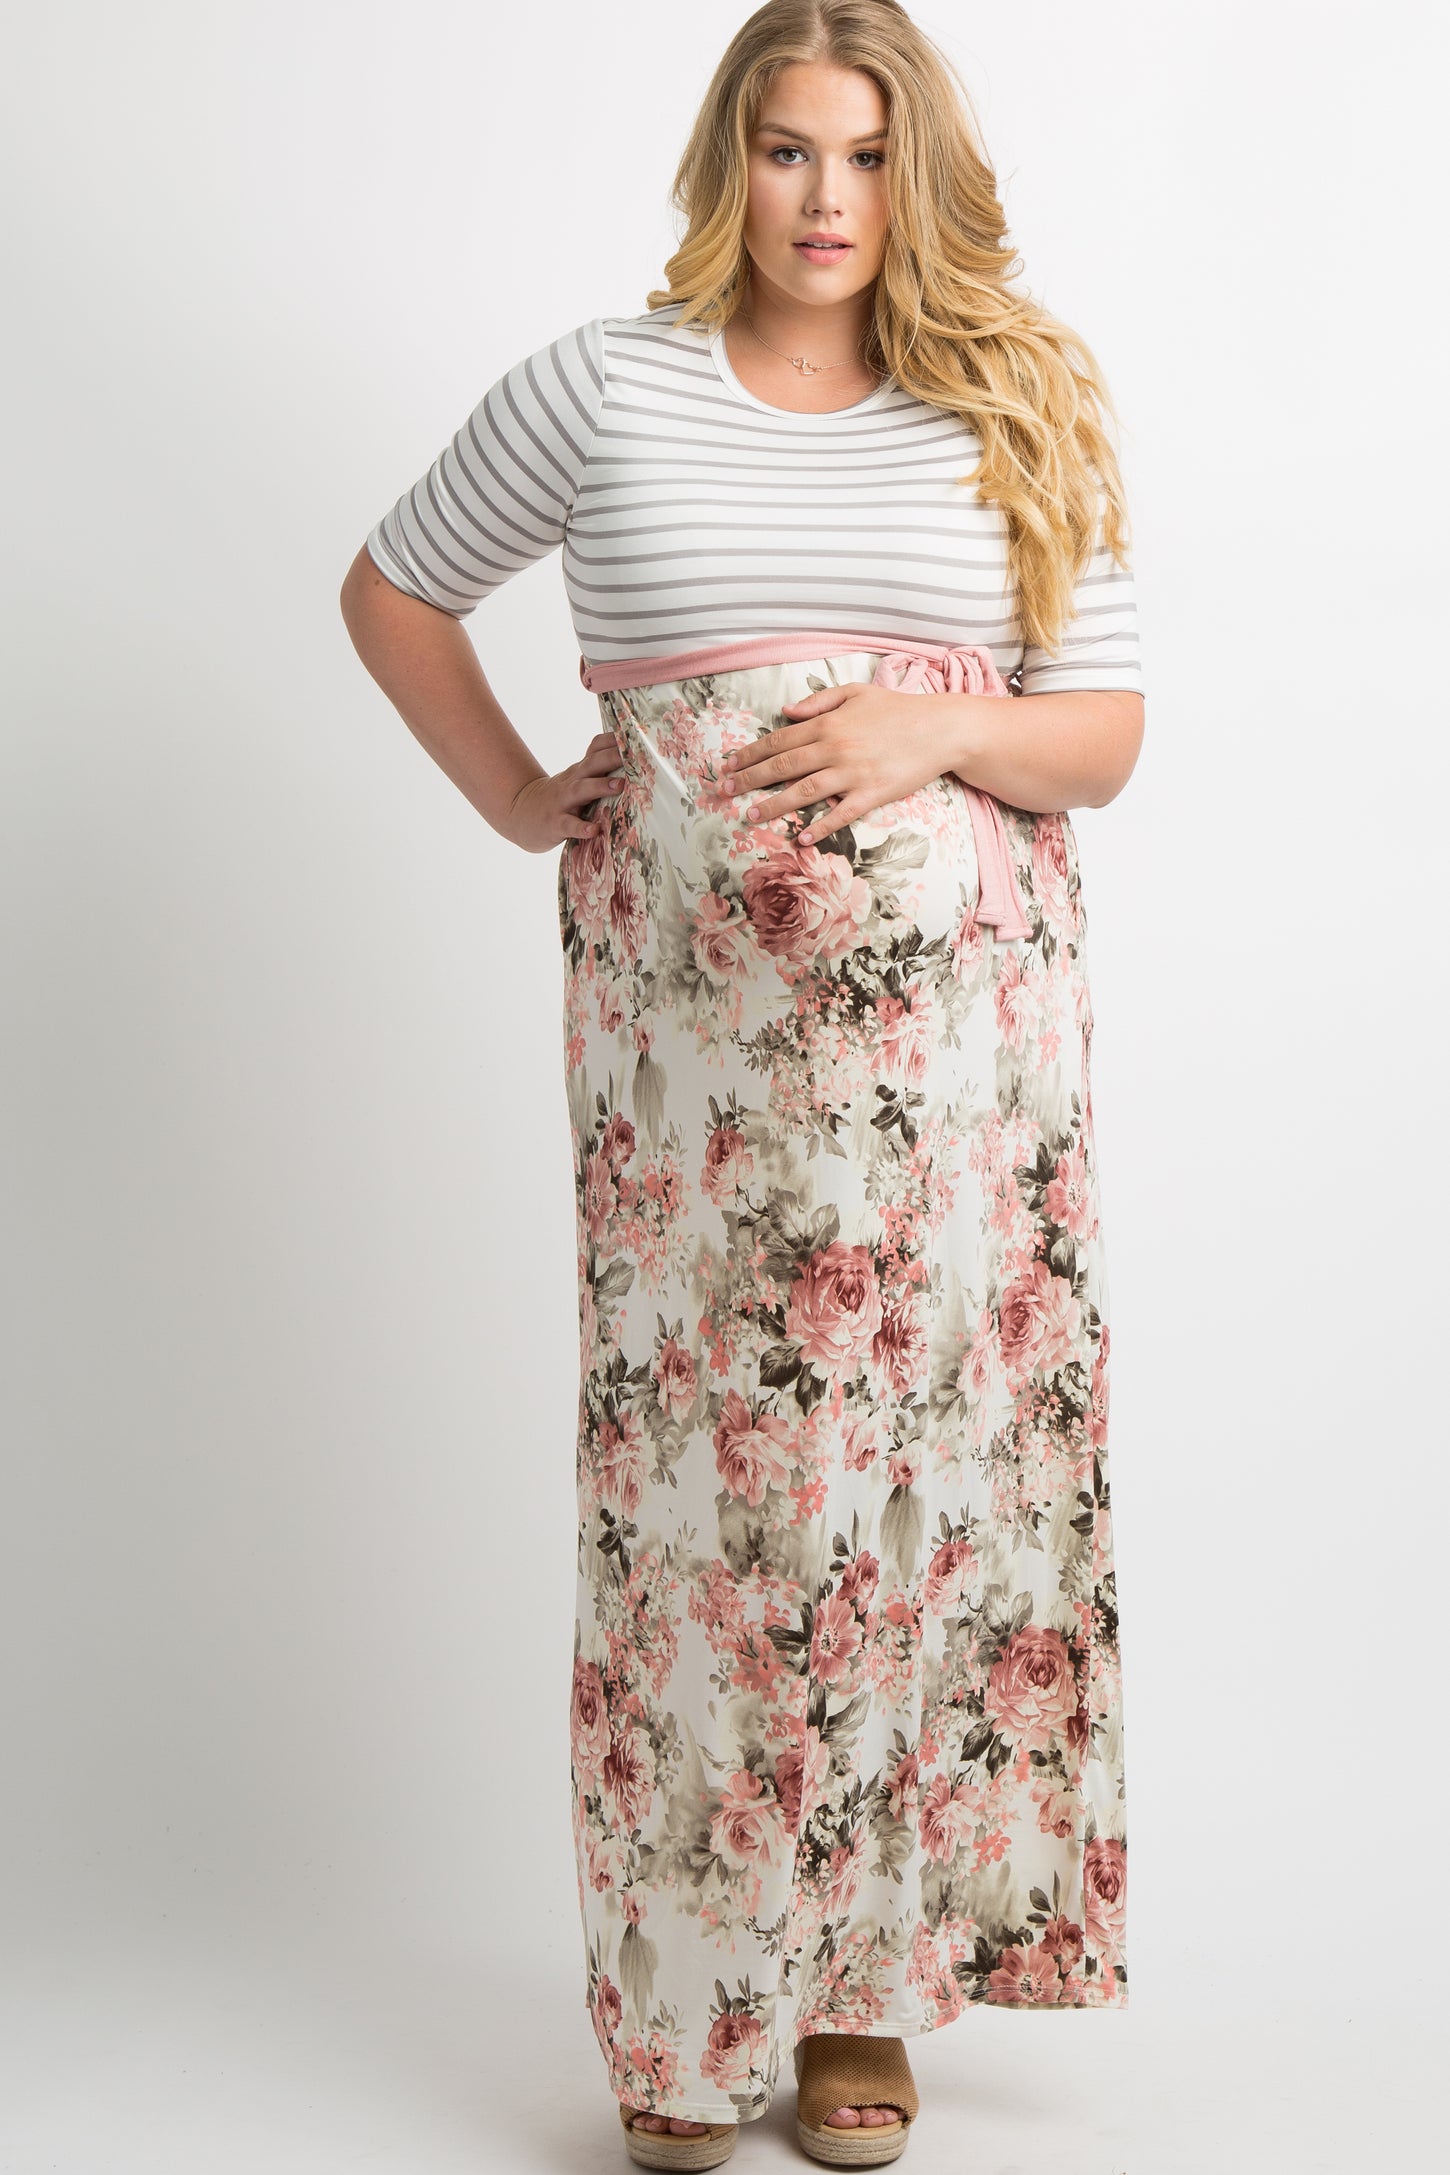 Ivory Striped Colorblock Floral Maternity Plus Maxi Dress